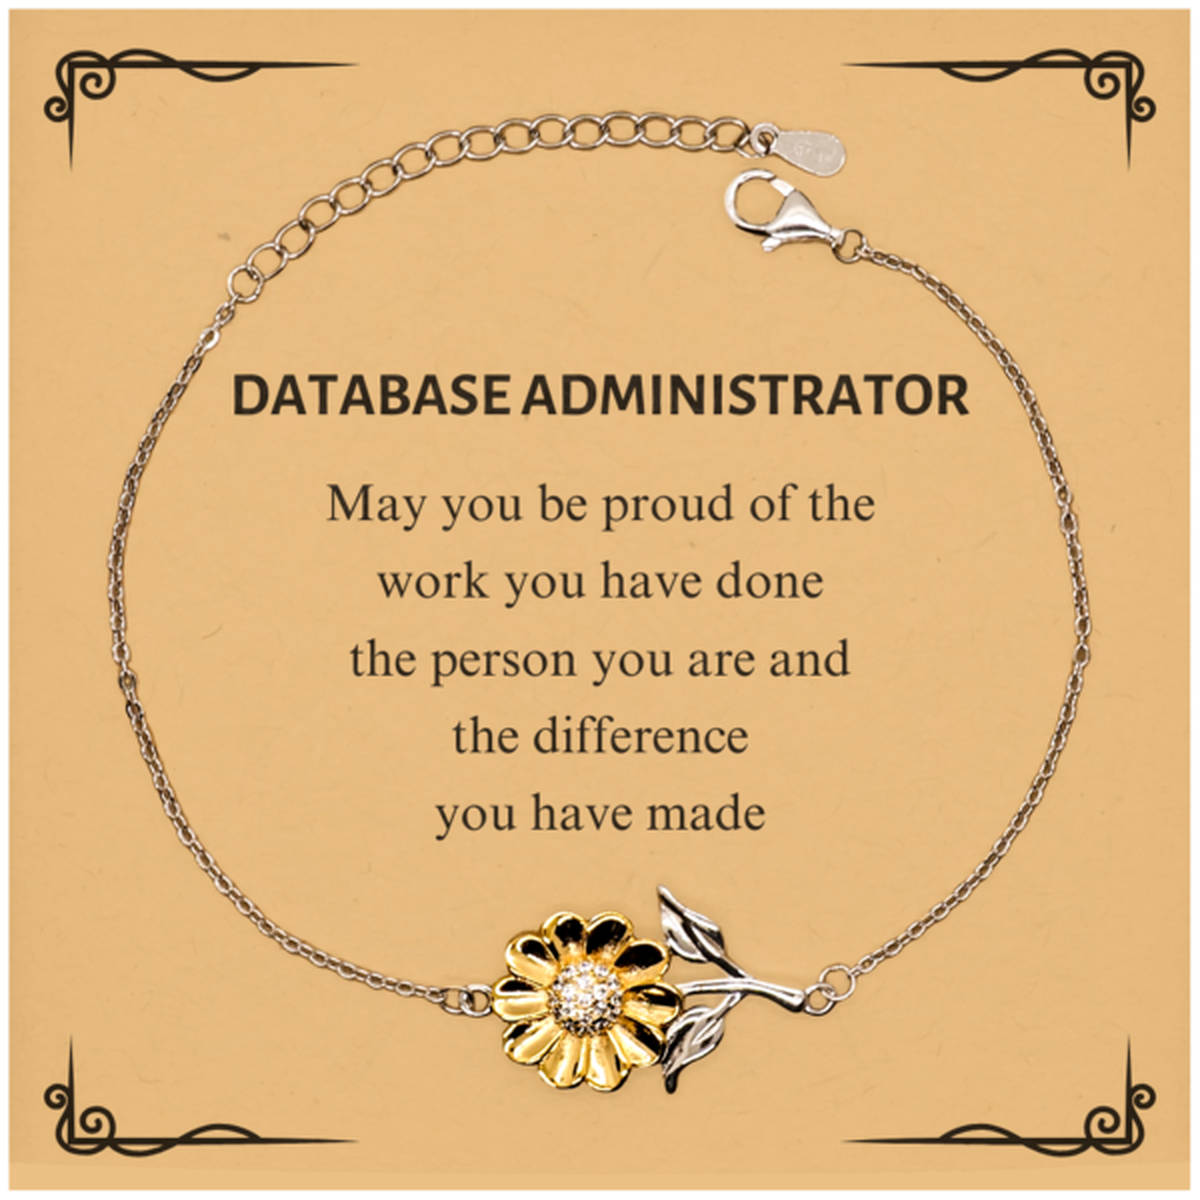 Database Administrator May you be proud of the work you have done, Retirement Database Administrator Sunflower Bracelet for Colleague Appreciation Gifts Amazing for Database Administrator